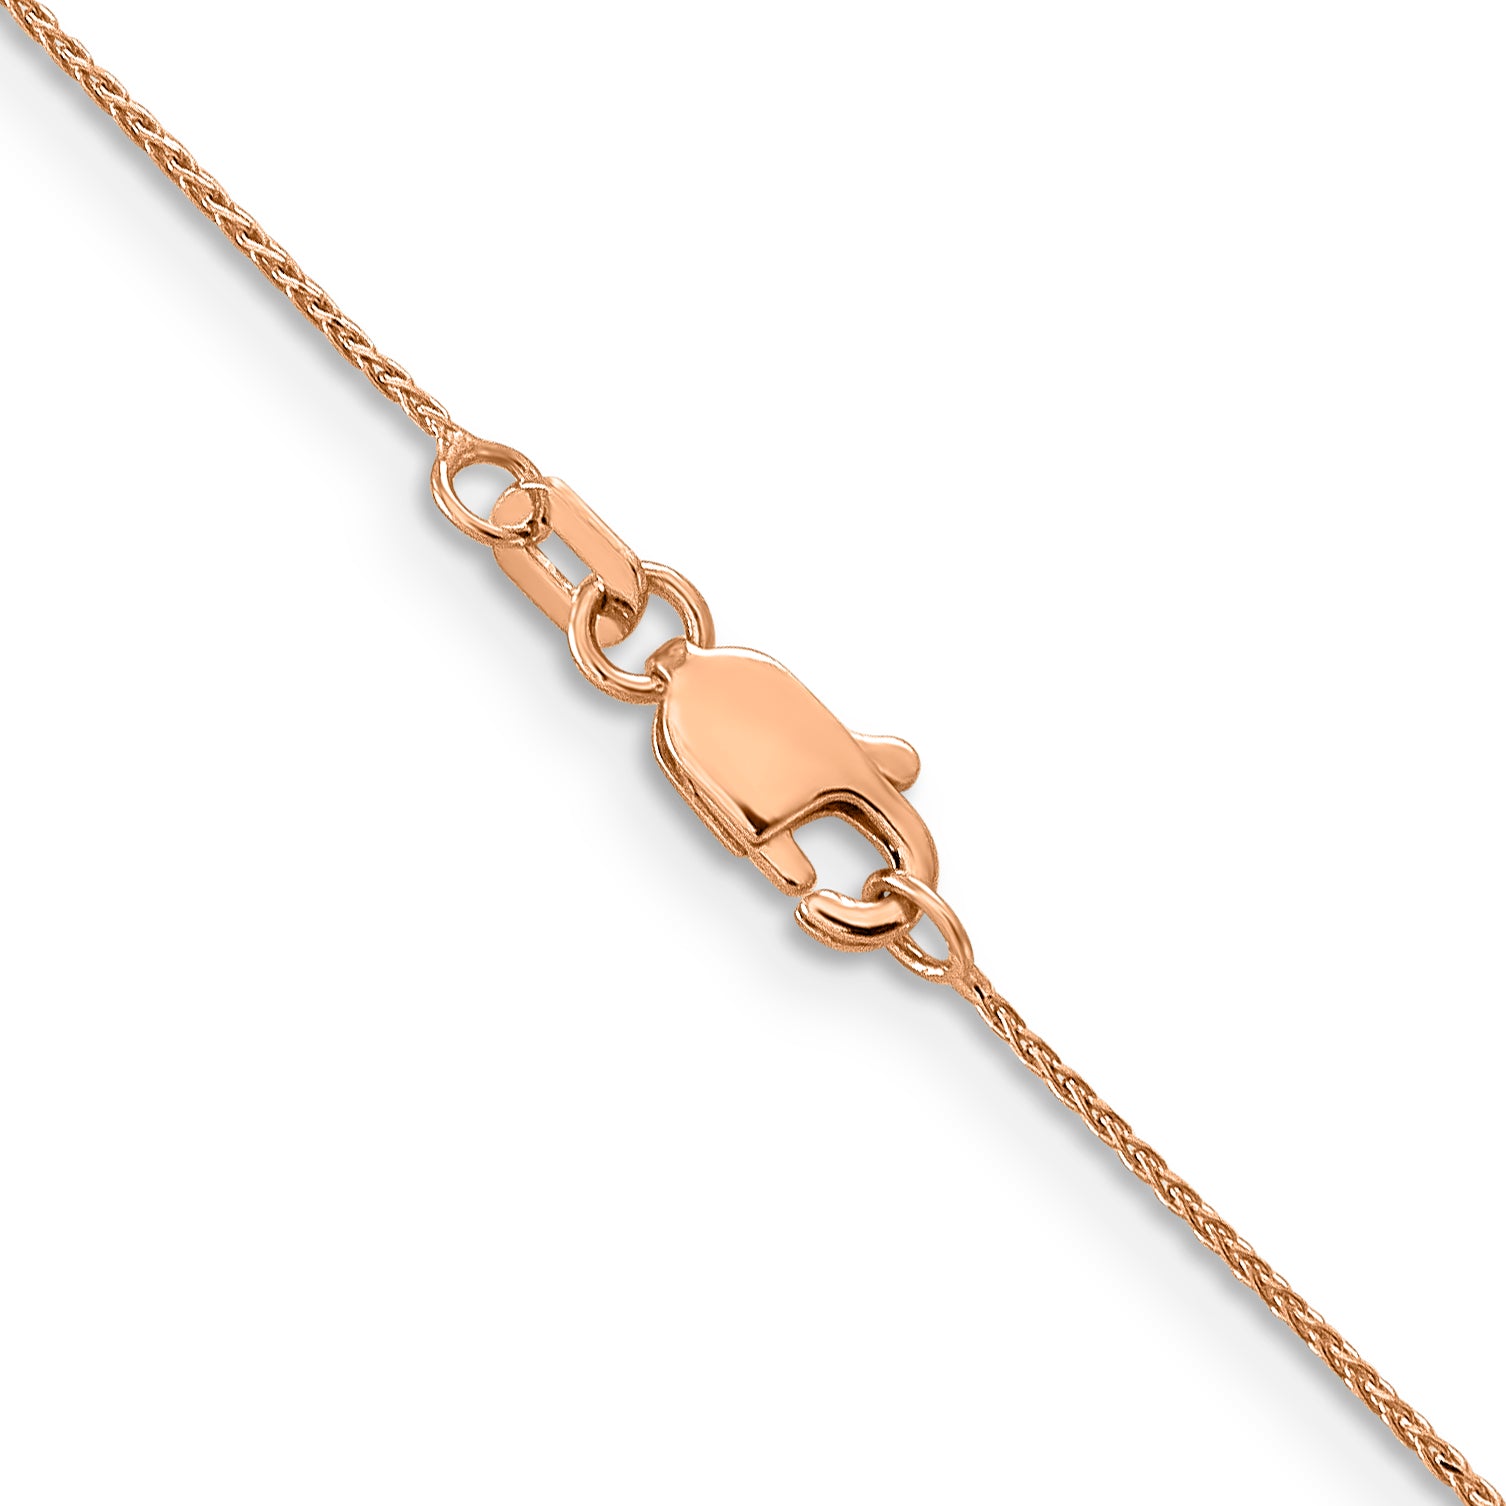 14K Rose Gold 16 inch .85mm Diamond-cut Spiga with Lobster Clasp Chain